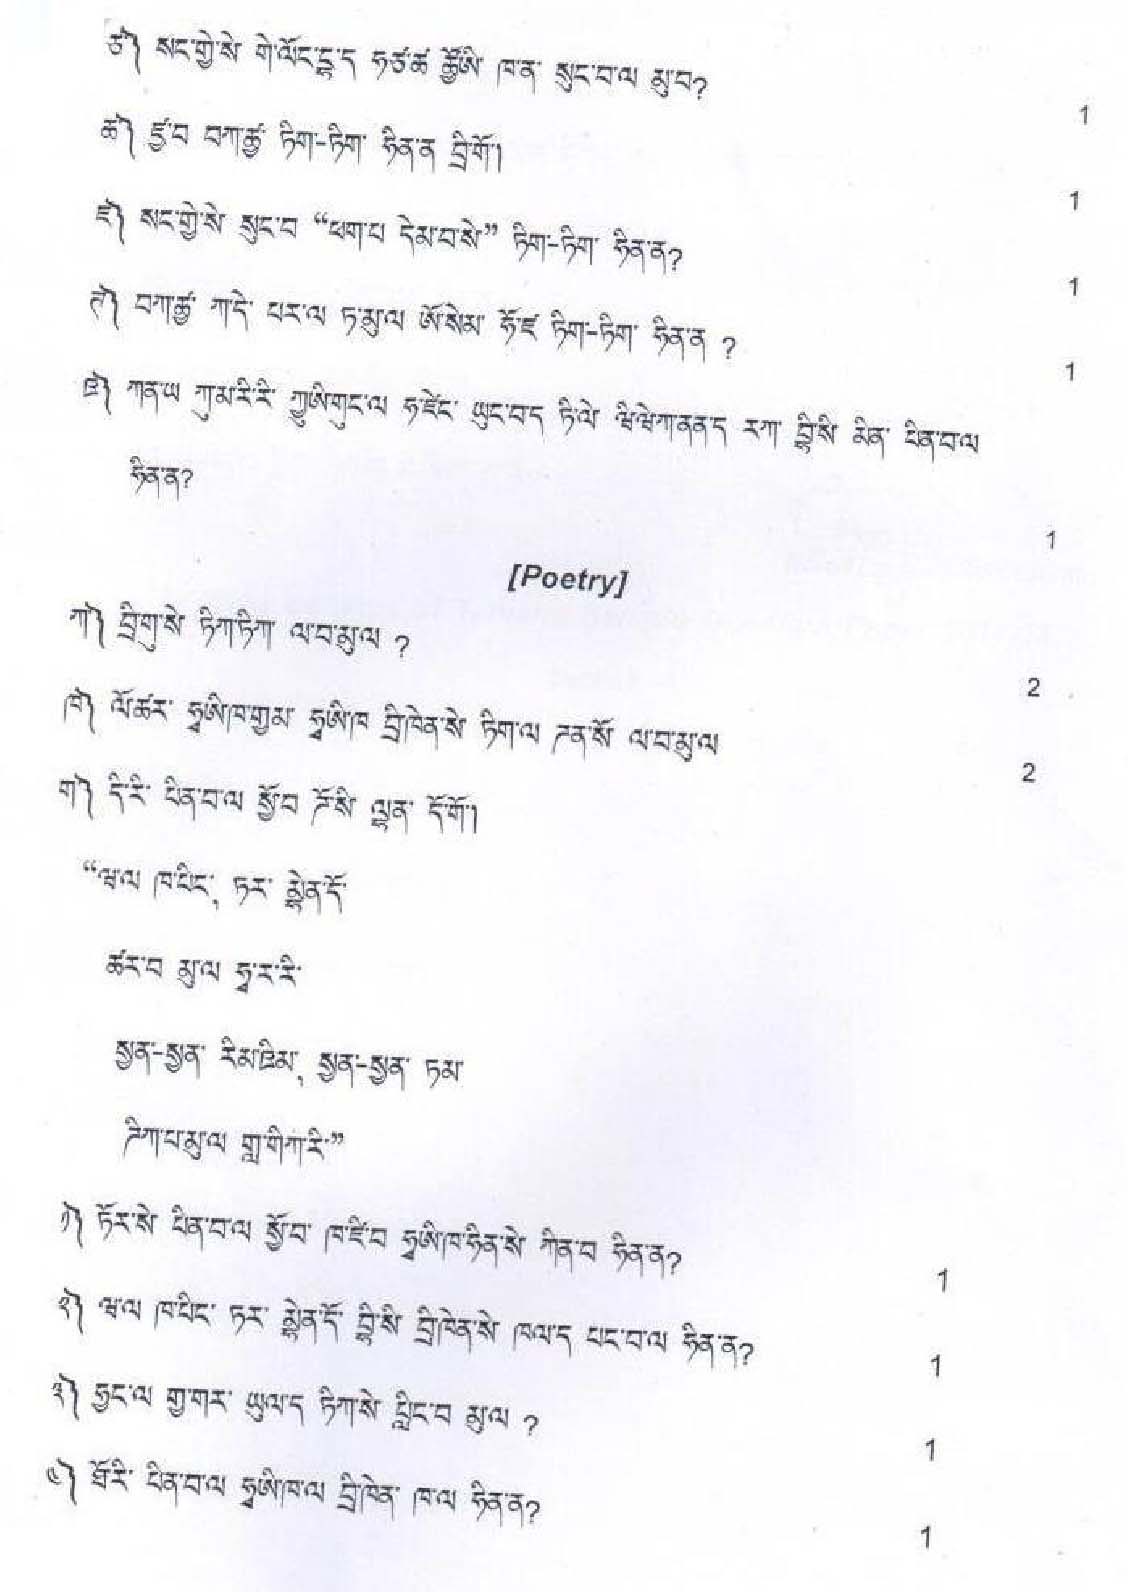 Tamang CBSE Class X Sample Question Paper 2018-19 - Image 4